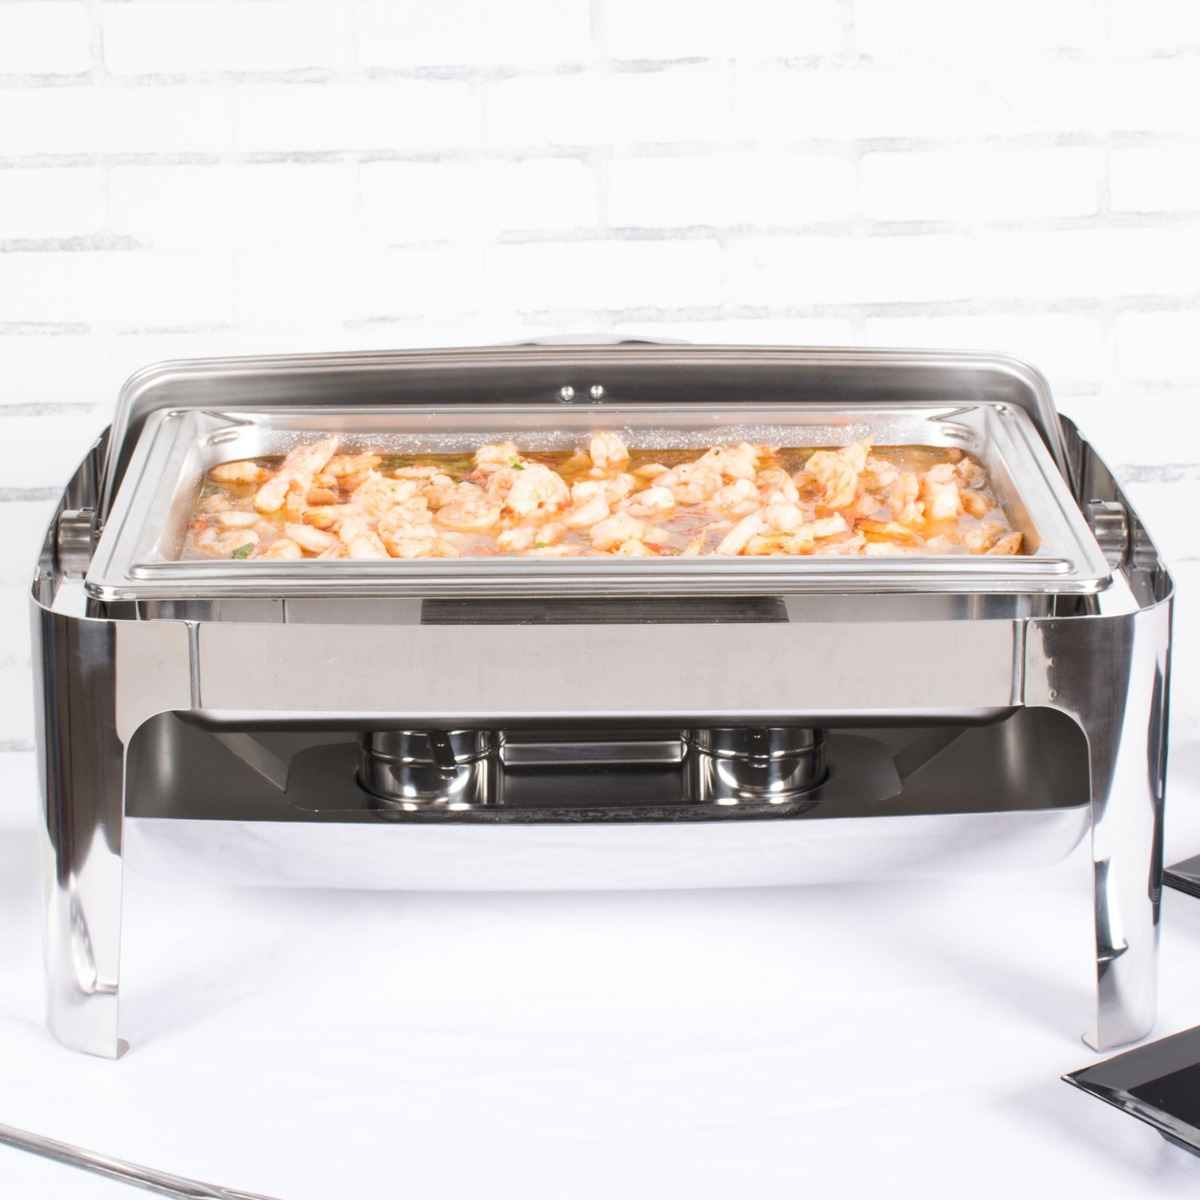 Chefset Chafing Dish Roll Top